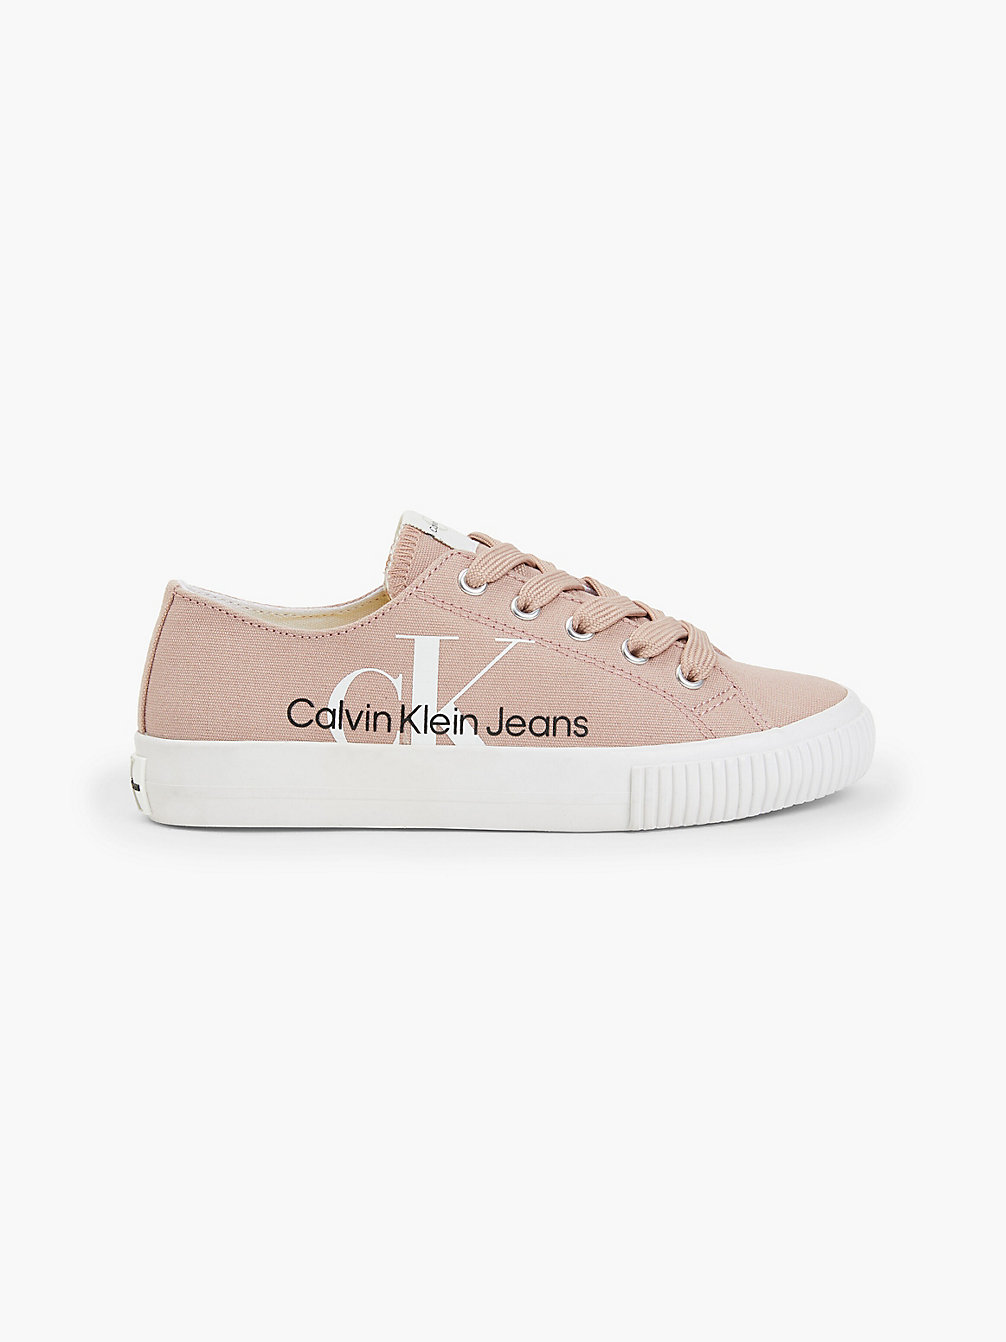 ANTIQUE ROSE Recycled Canvas Trainers undefined girls Calvin Klein